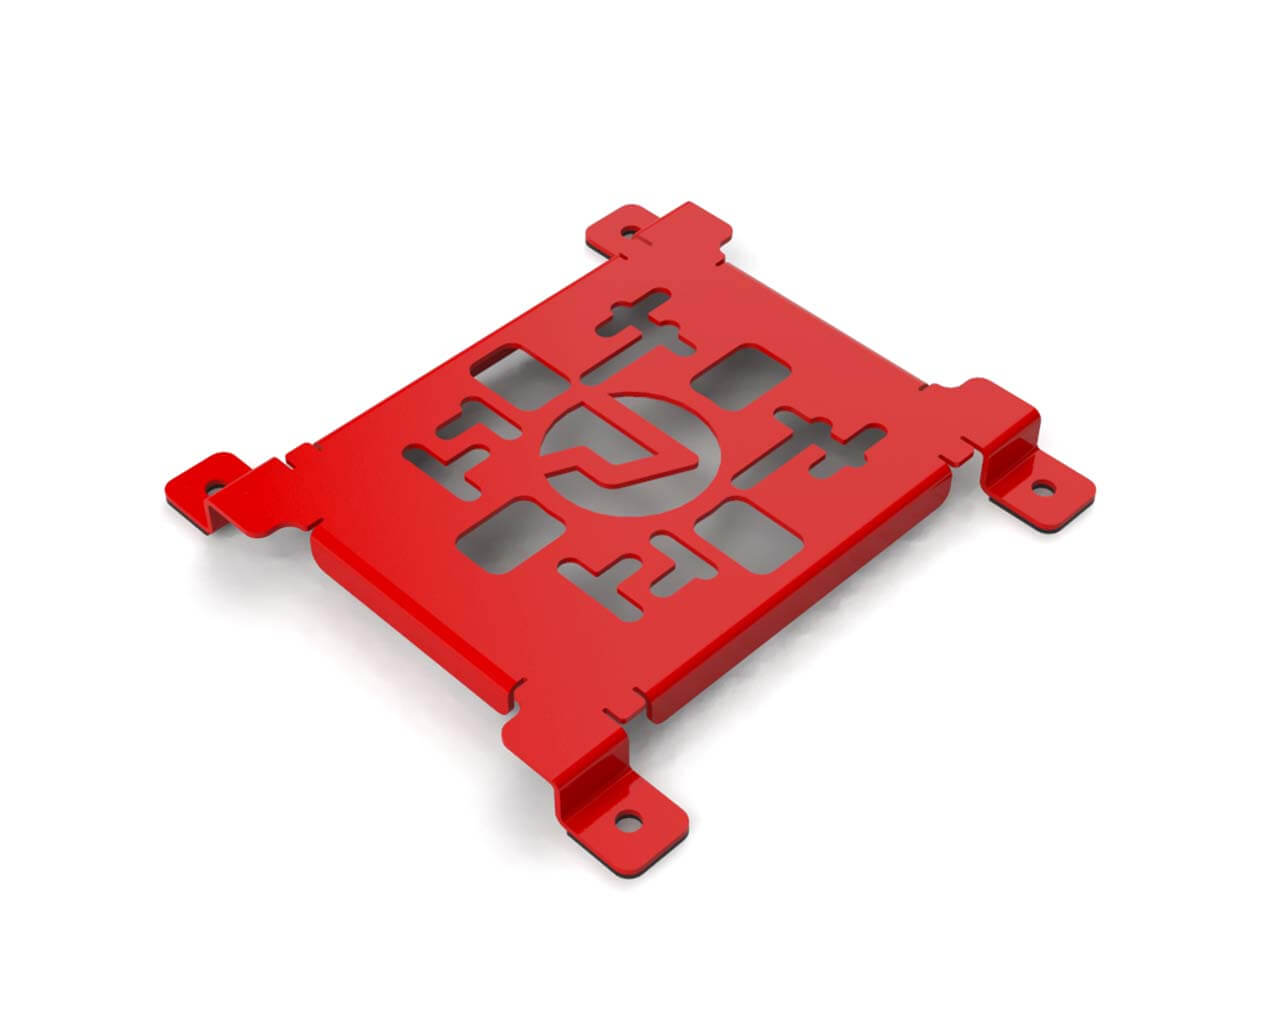 PrimoChill SX Spider Mount Bracket - 120mm Series - PrimoChill - KEEPING IT COOL UV Red